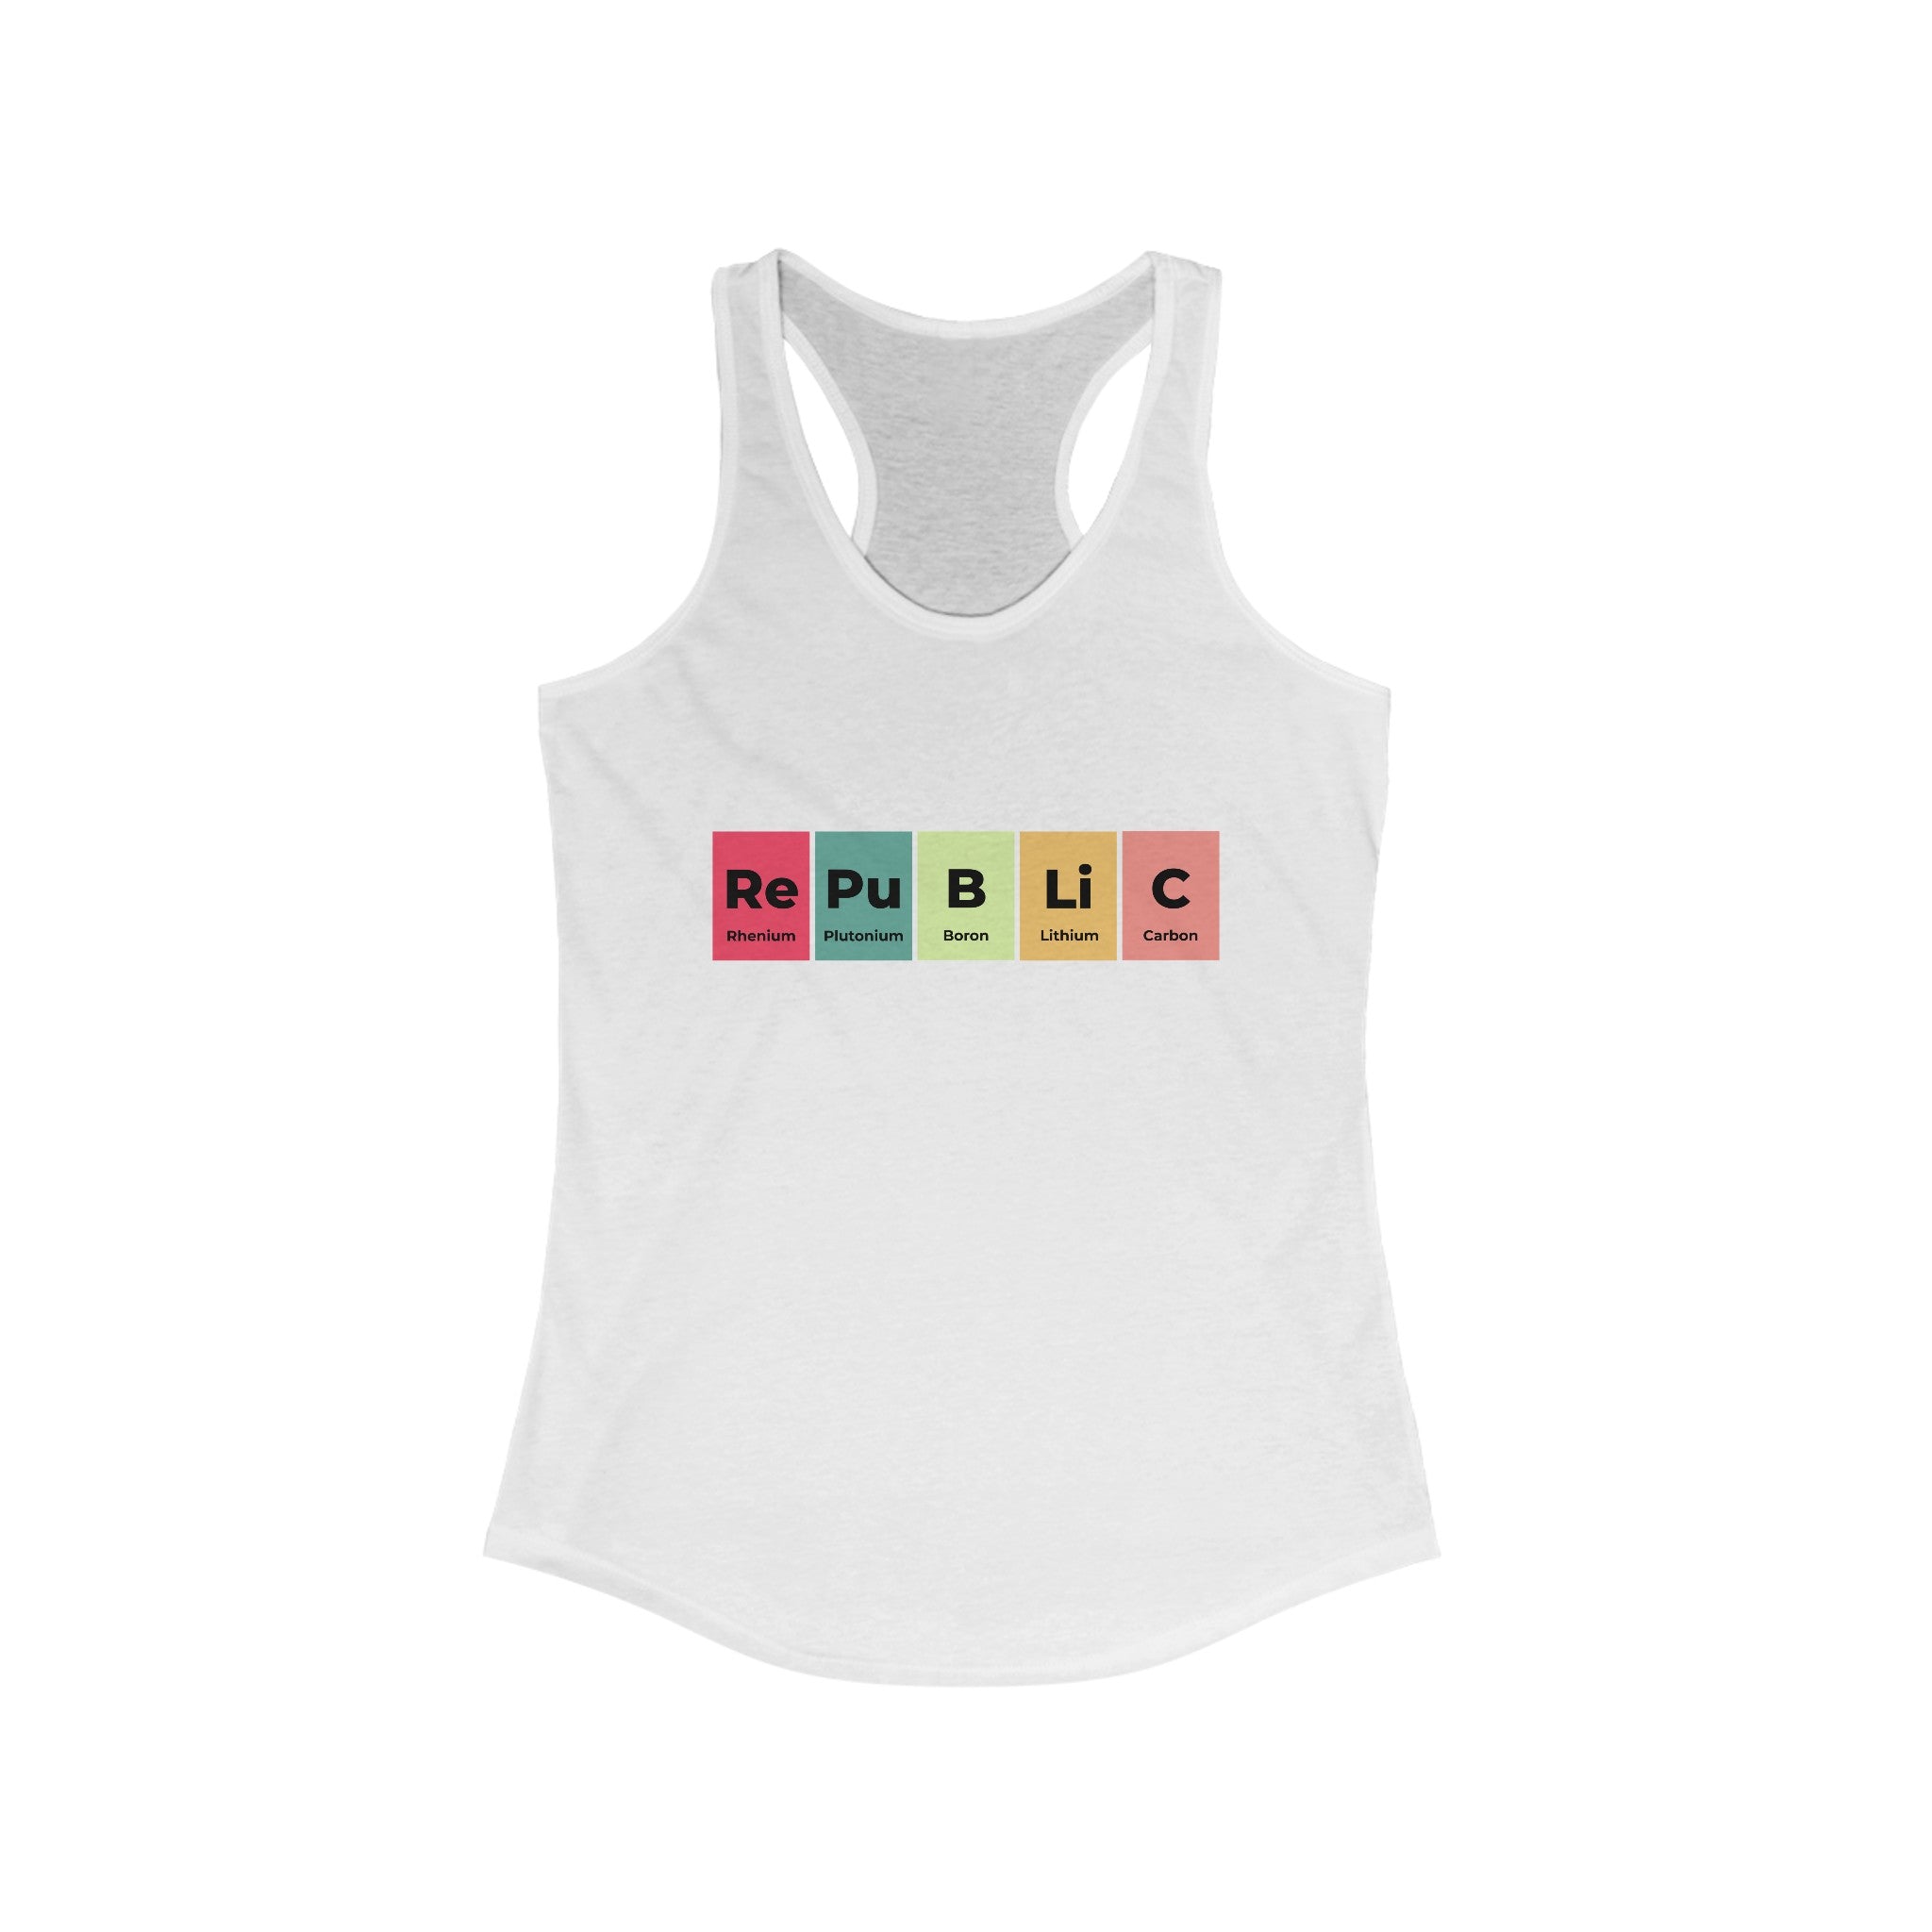 Republic - Women's Racerback Tank featuring the word "Republic" spelled out using elements of the periodic table placed on colored squares, perfect for your fitness journey.